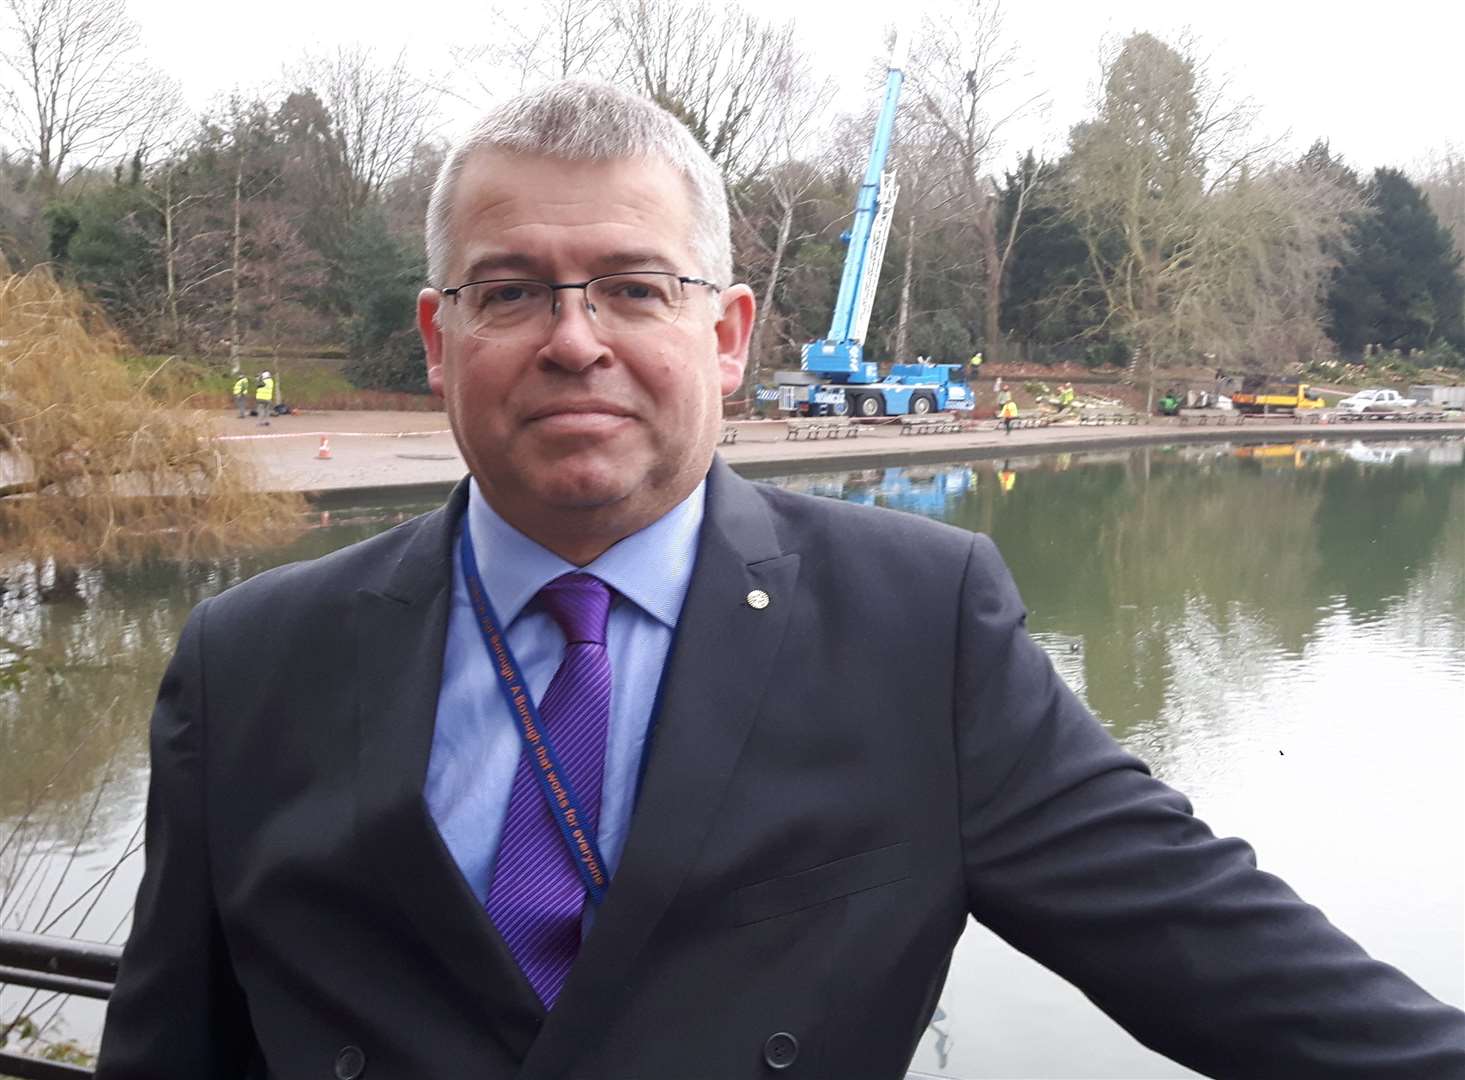 Cllr Martin Cox, leader of Maidstone Borough Council, has said the delays in the surge testing results could affect the public's attitude towards the government